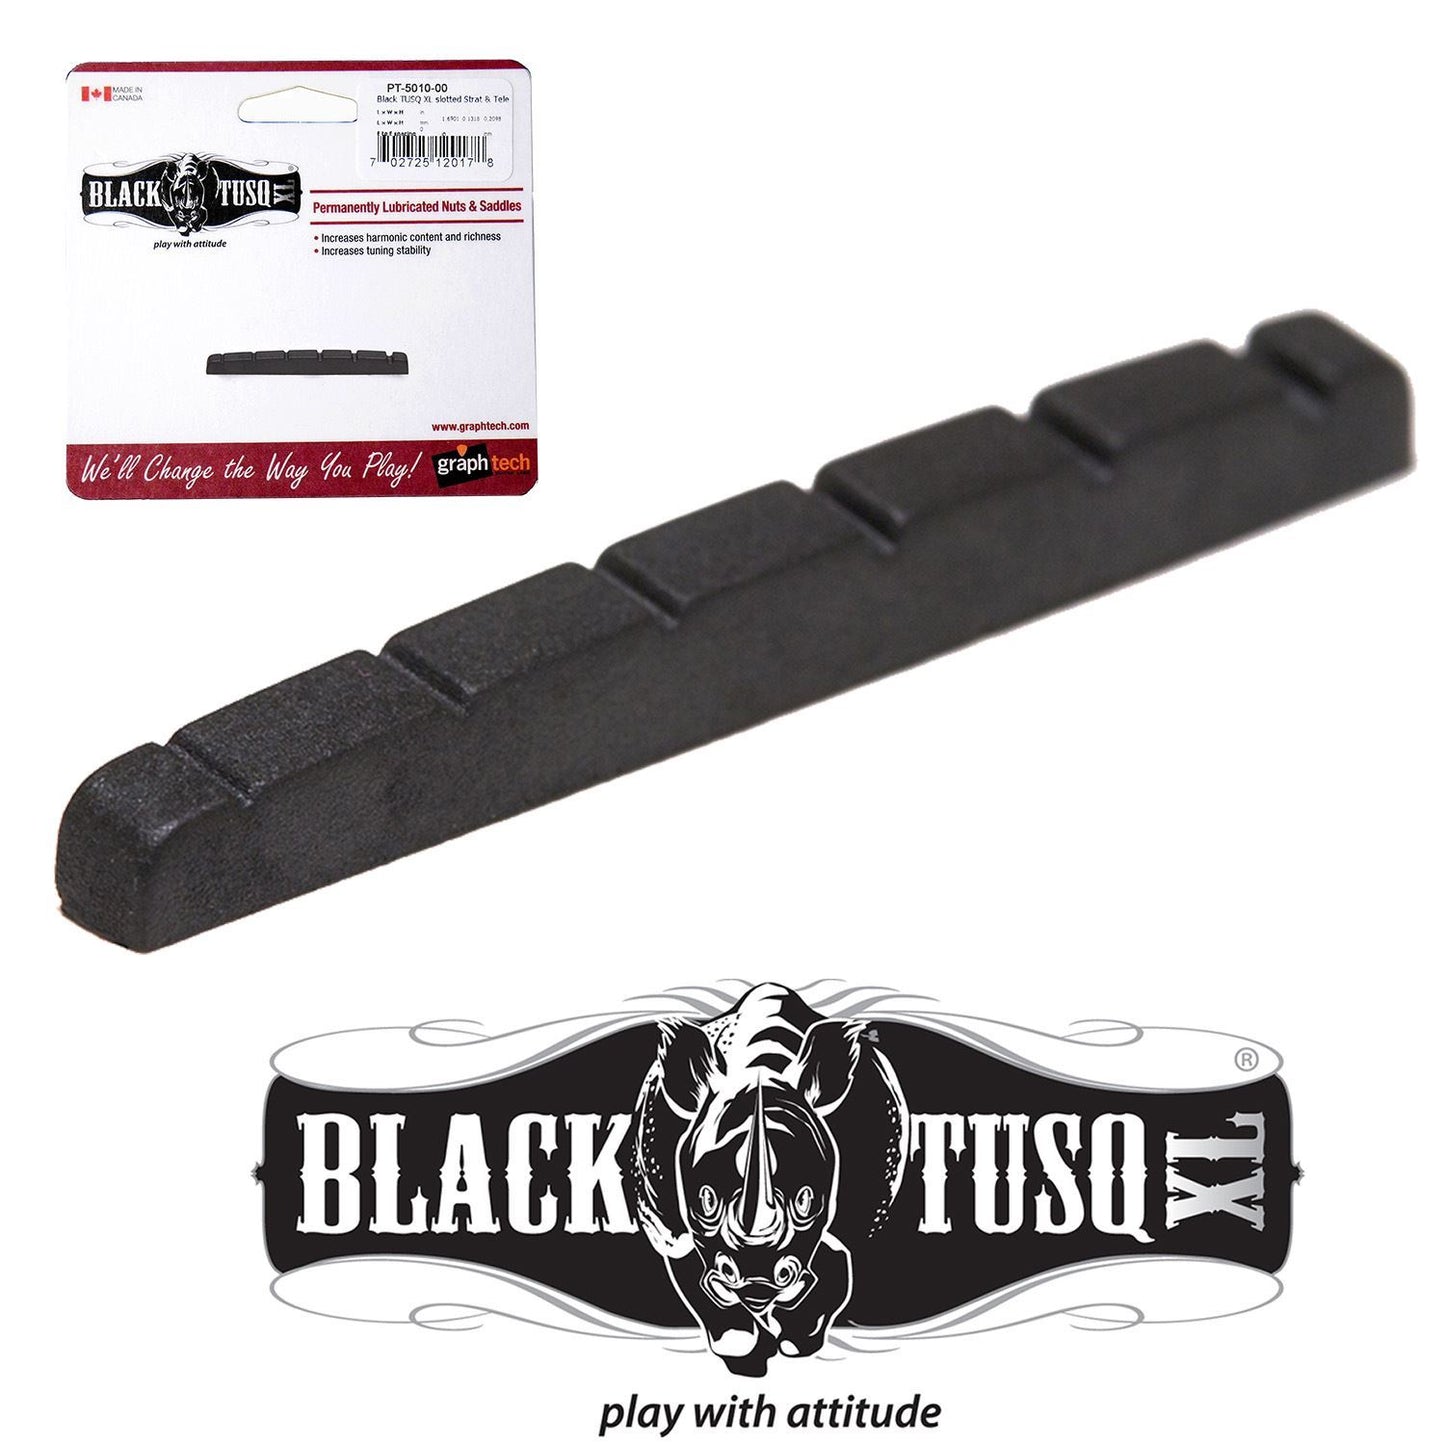 Graphtech Black PT-5010-00 Slotted Tusq XL Nut 44mm Flat Bottom for Stratocaster / Telecaster etc..